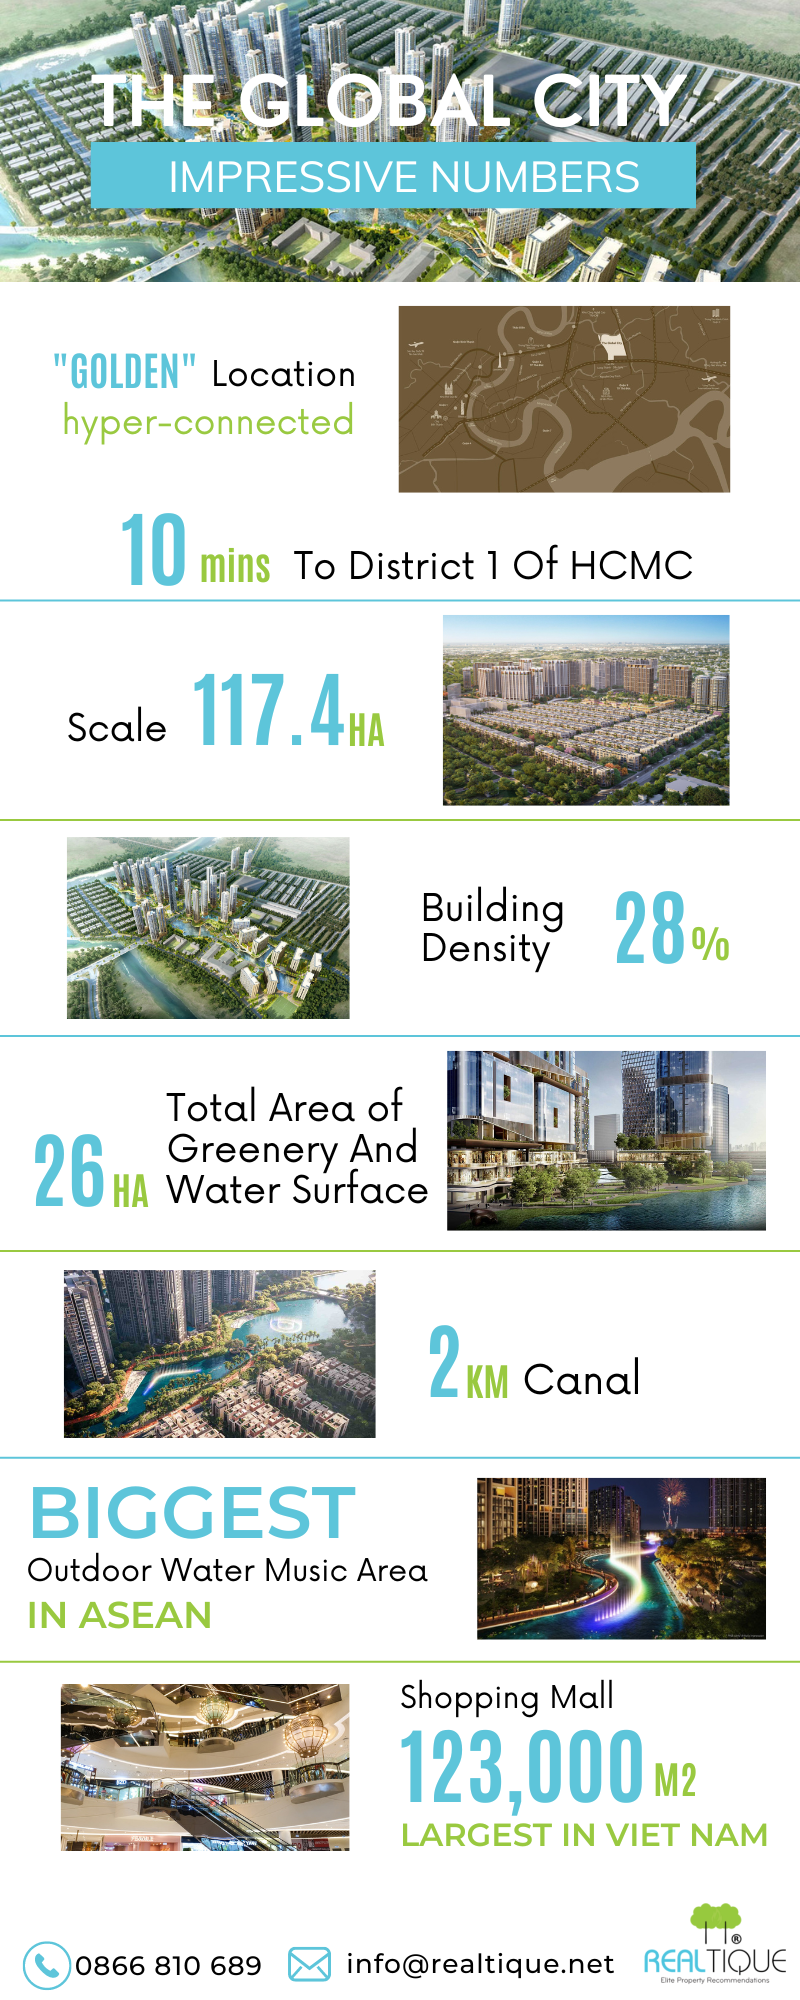 Impressive numbers confirm The Global City is an international standard urban area